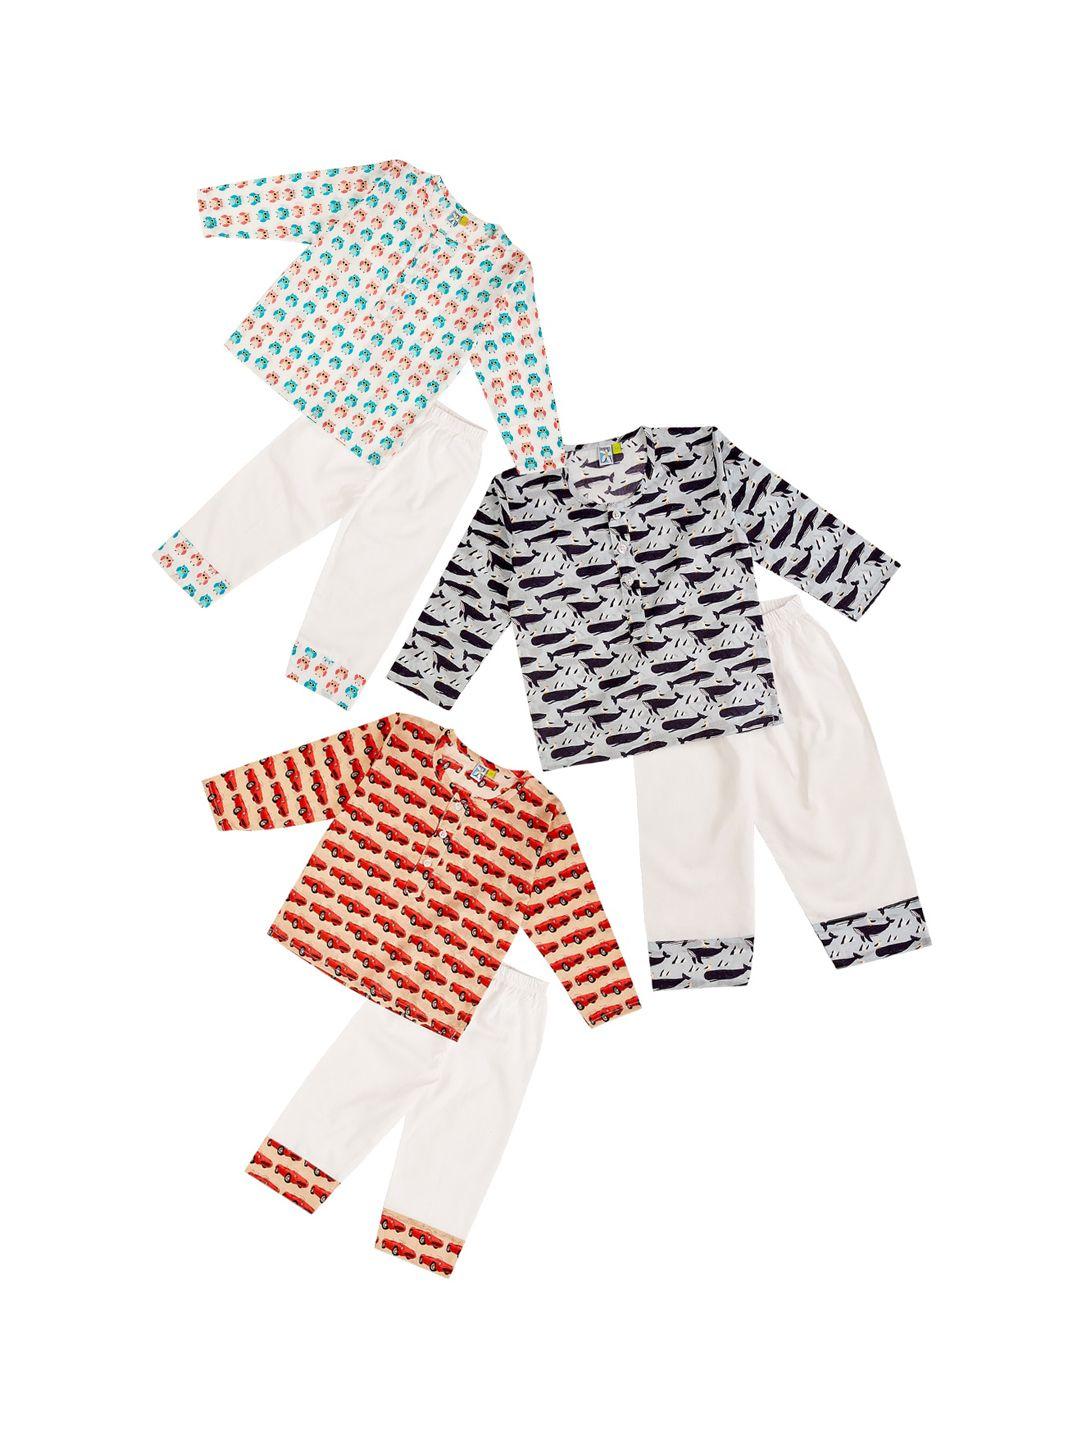 frangipani boys pack of 3 white & red printed pure cotton night suit